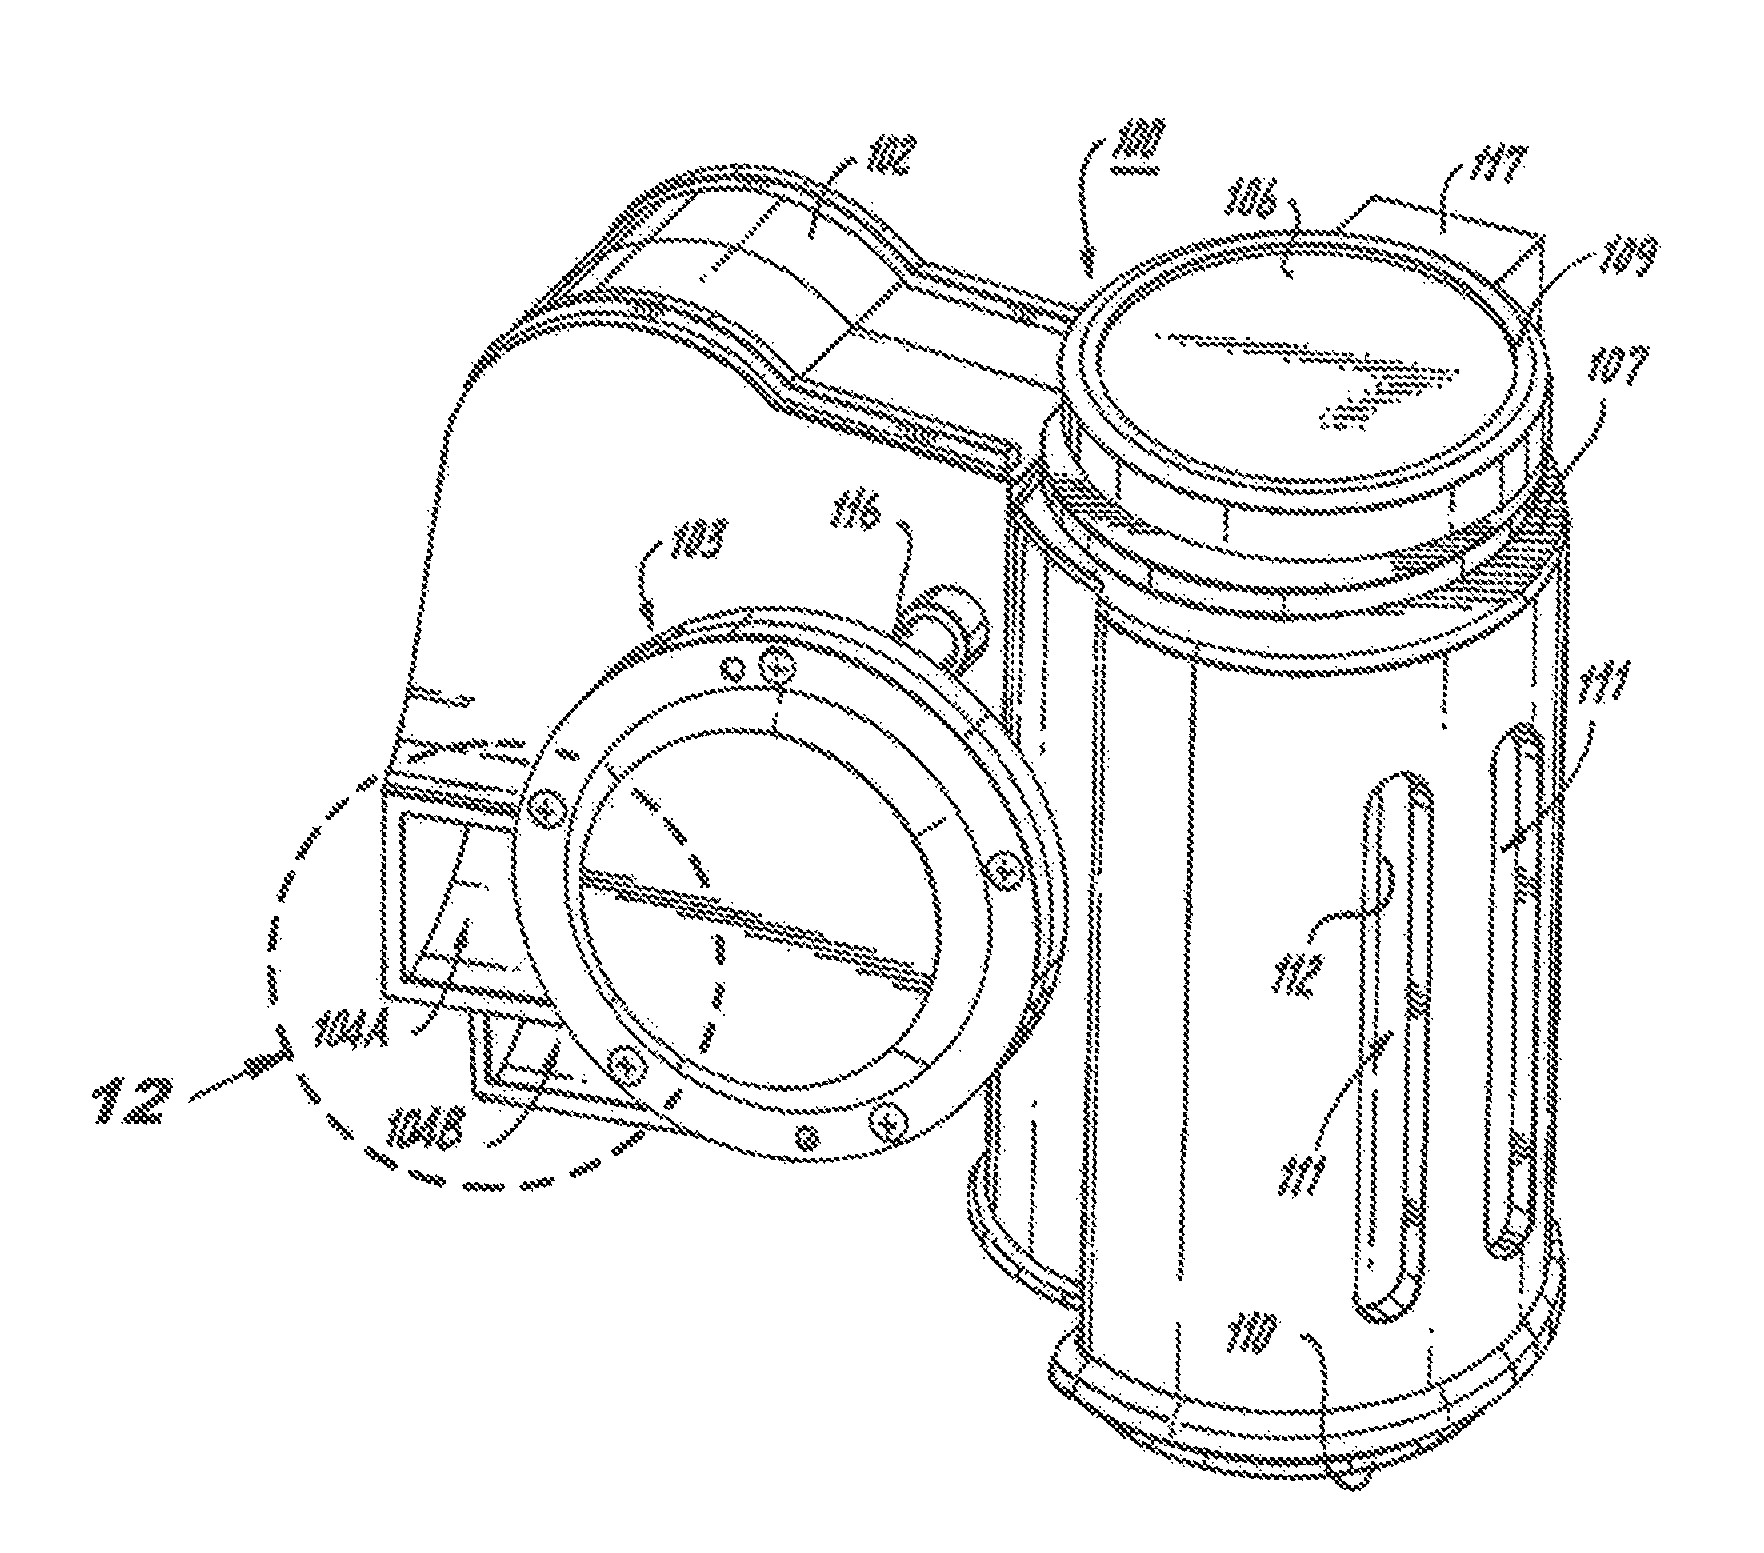 Diaphragm for an electropneumatic horn system